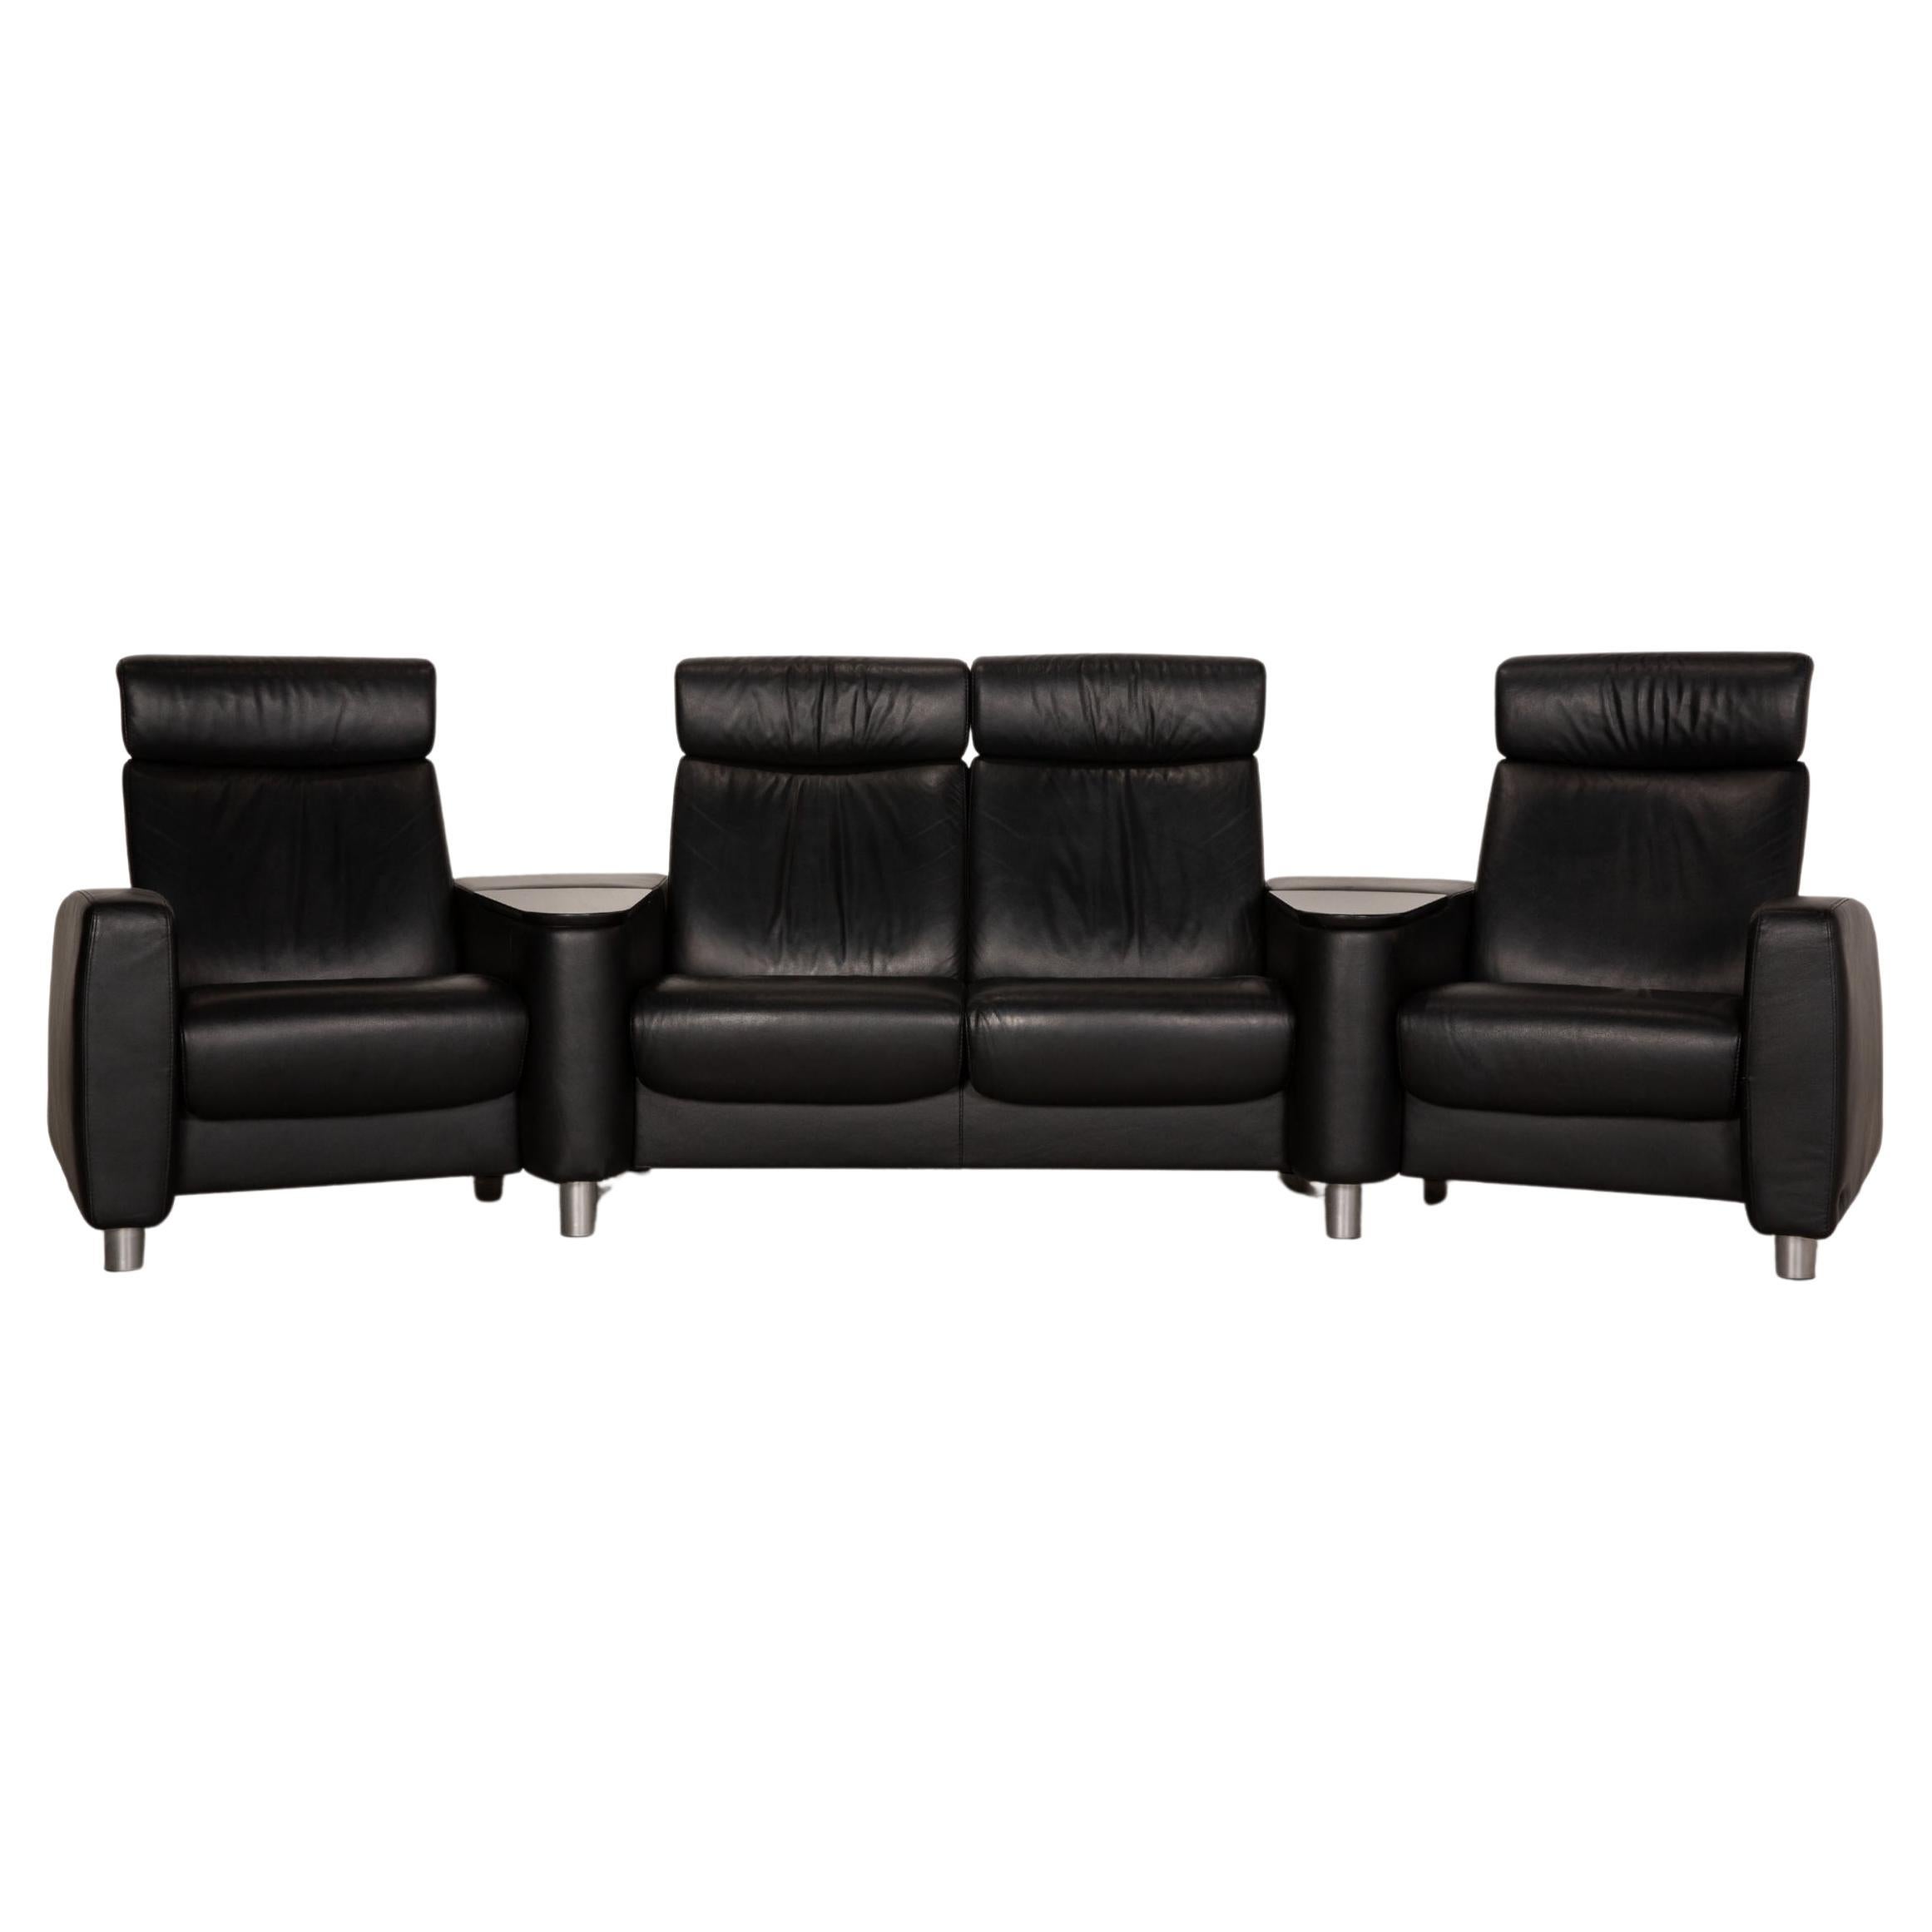 Stressless Arion Leather Sofa Black Four Seater Couch Feature For Sale